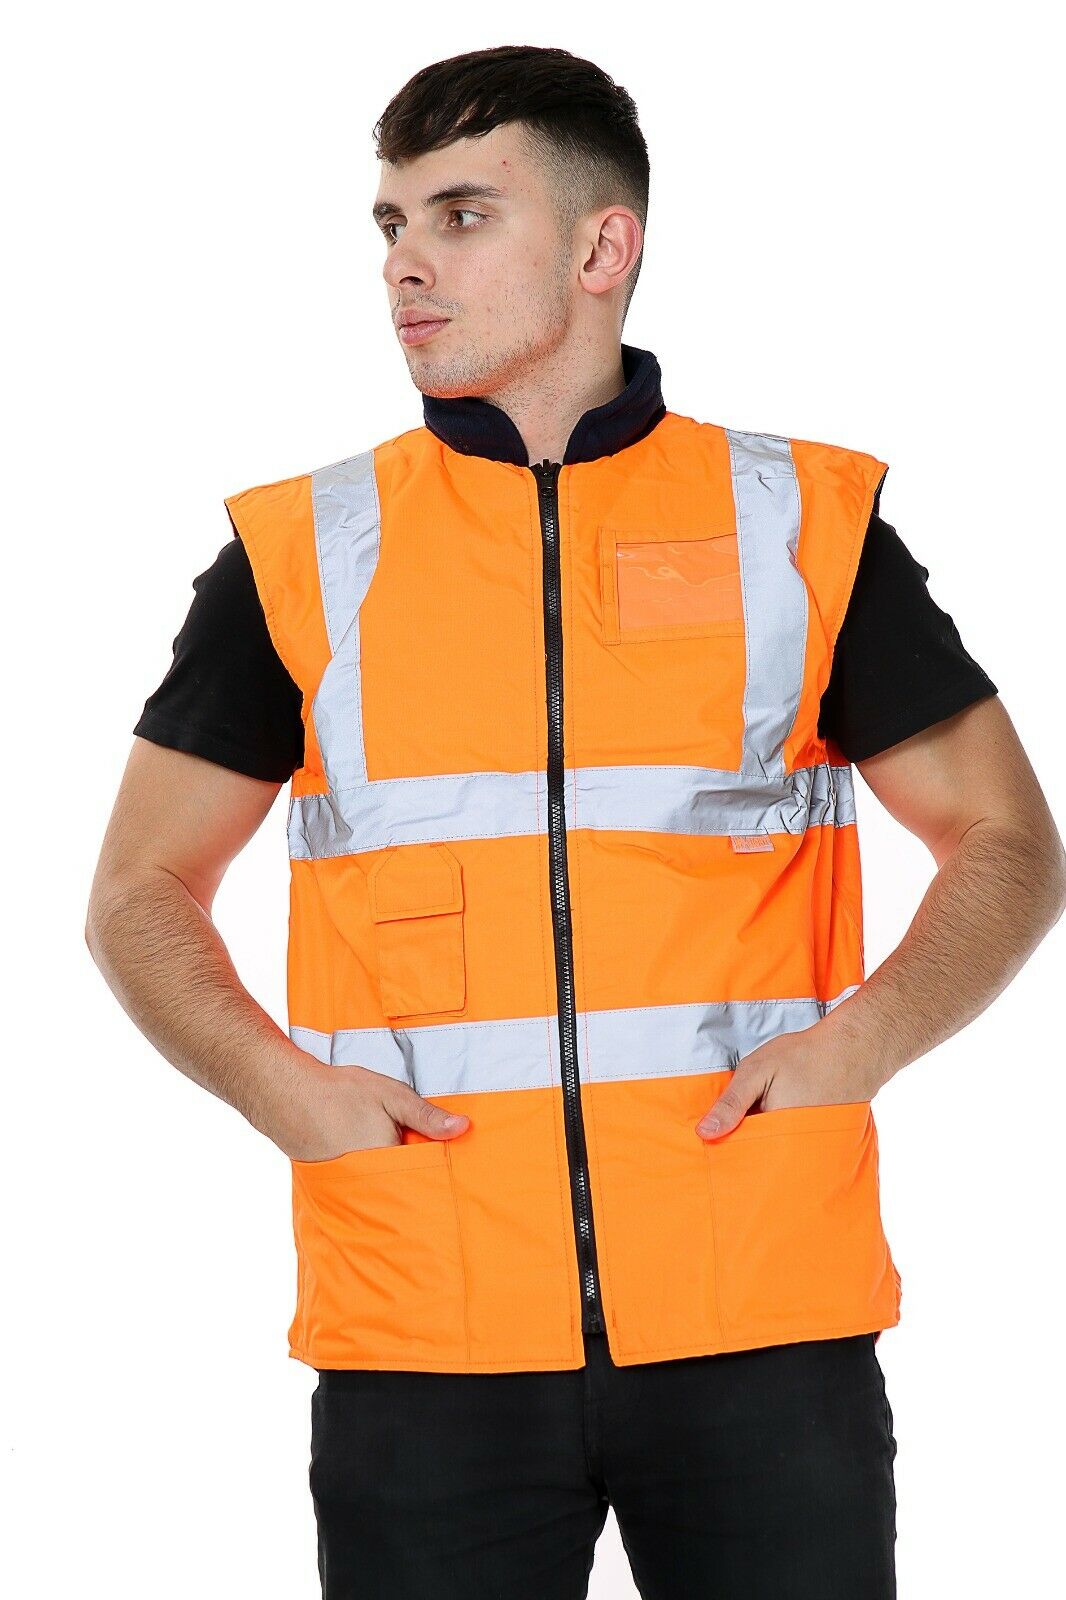 Hi Vis Orange  EN471 Class 2 Work Wear Gilets. These Have Multiple Pockets At The Front. It Is A Zip Fastening. The Gilets Have The CE Testing Mark Demonstrating Compliance With 89/686/EEC Personal Protective Equipment Annex 11 Heath And Safety Requirements. They Have Also Been manufactured Under Rigorous ISO9001 Quality Process Standards. These Are Available In yellow Also In Sizes Small To 5 X-Large.